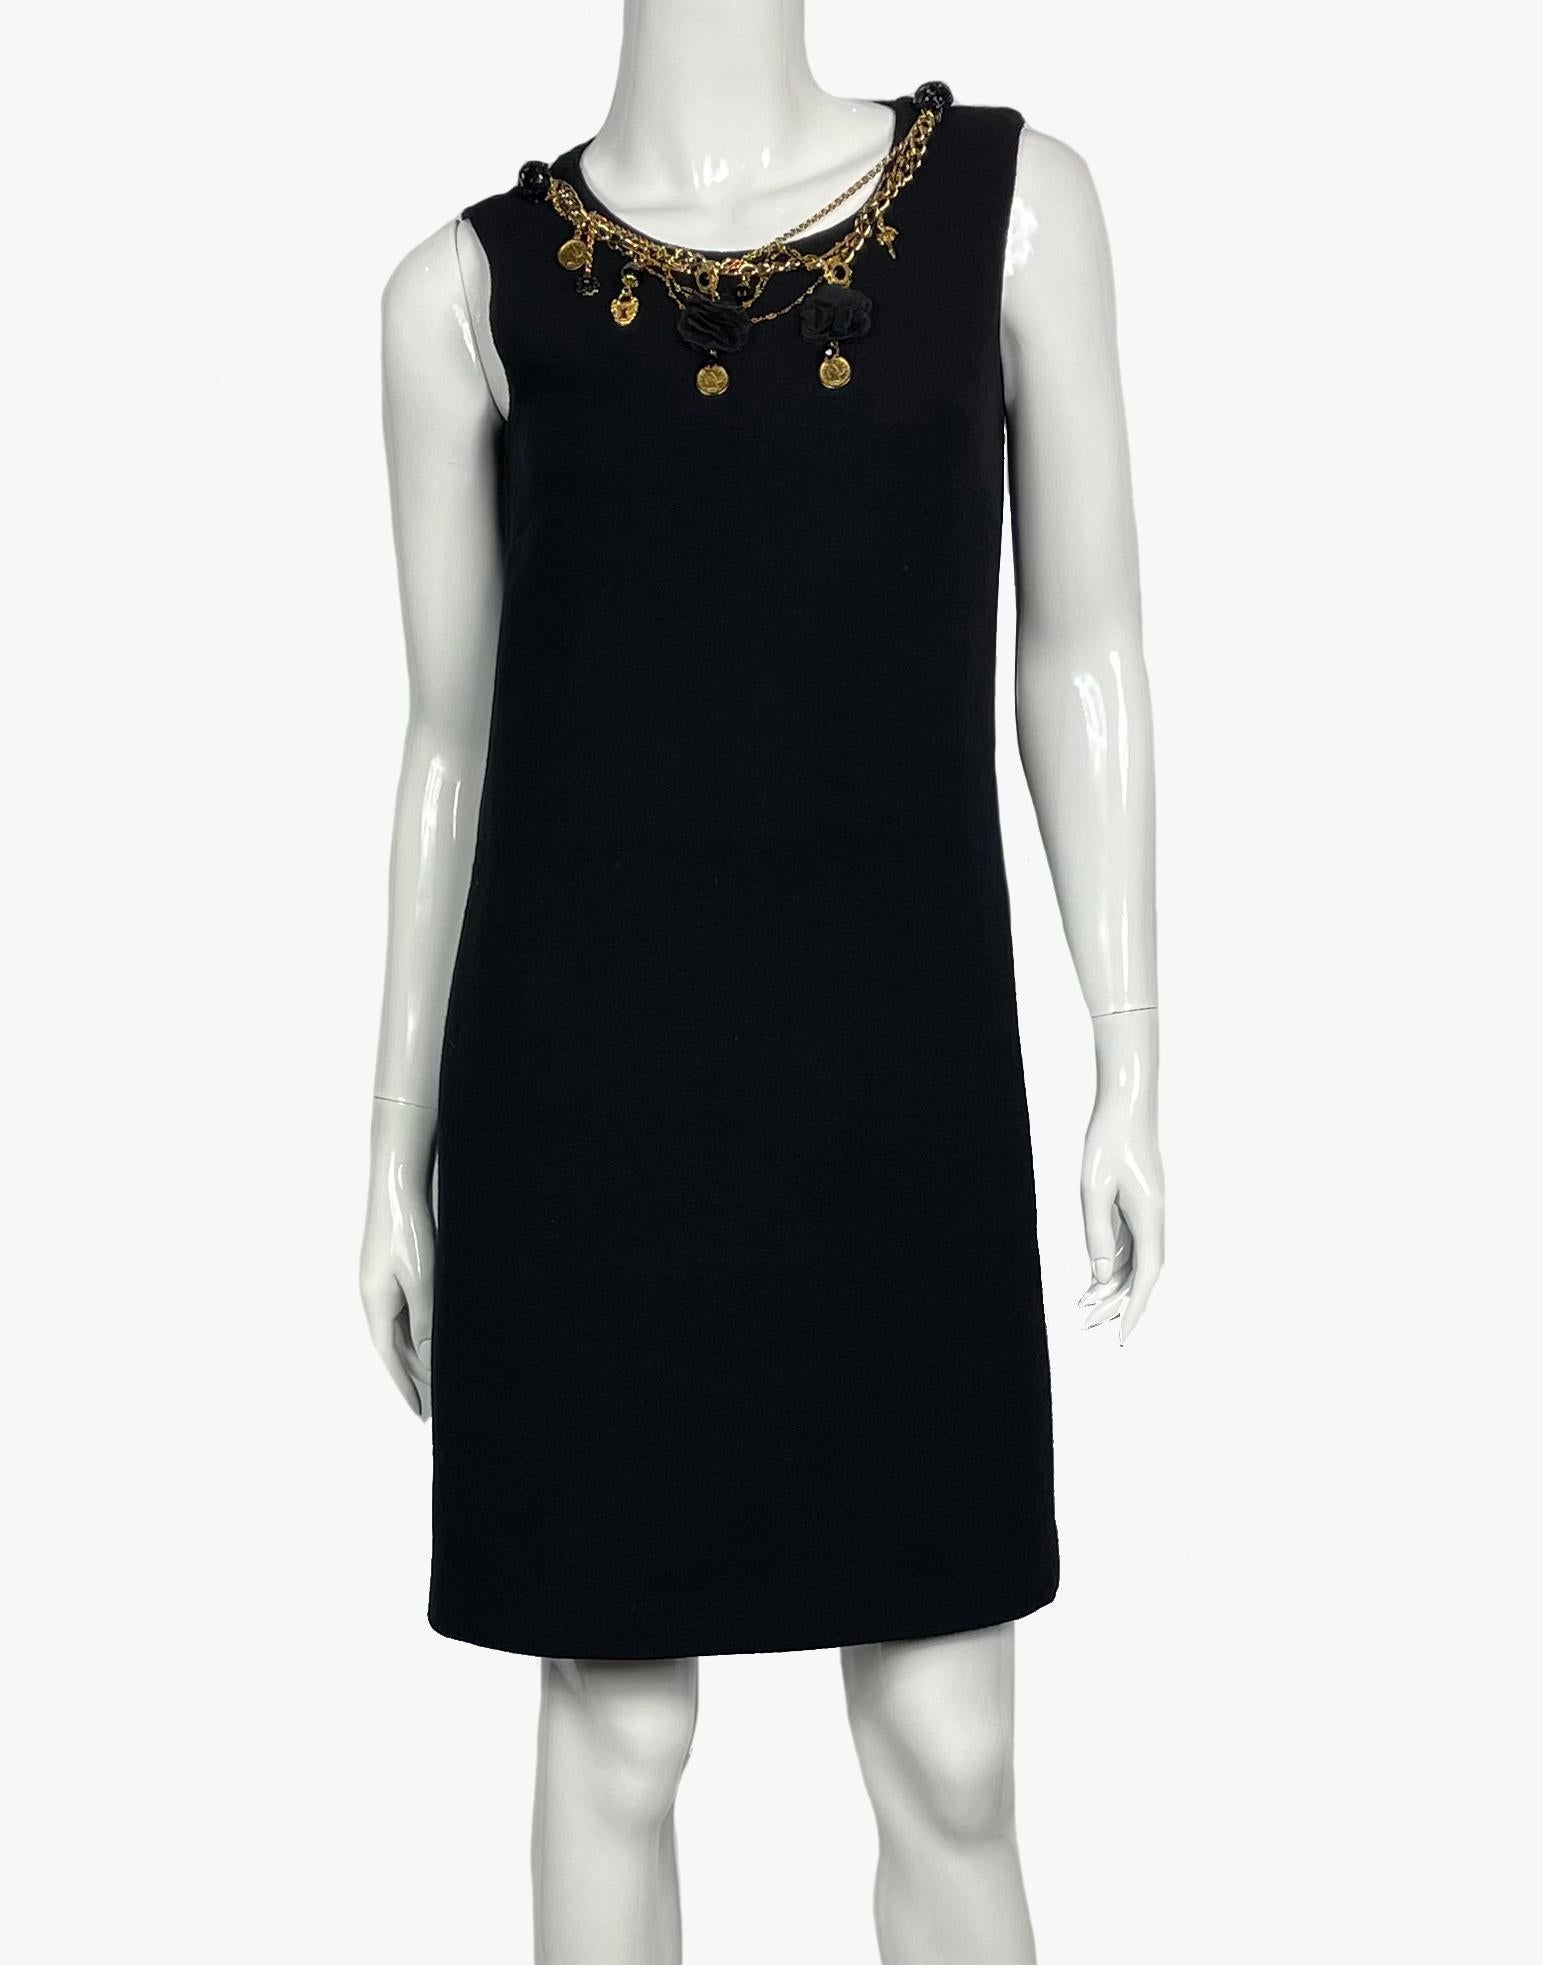 Black mini dress by Dolce Gabbana decorated with golden chains and medallions. Straight cut, sleeveless.  
Period: 2010s
Size - IT 36
Composition: 77% virgin wool, 19% polyamide, 4% lycra

........Additional information ........

- Photo might be